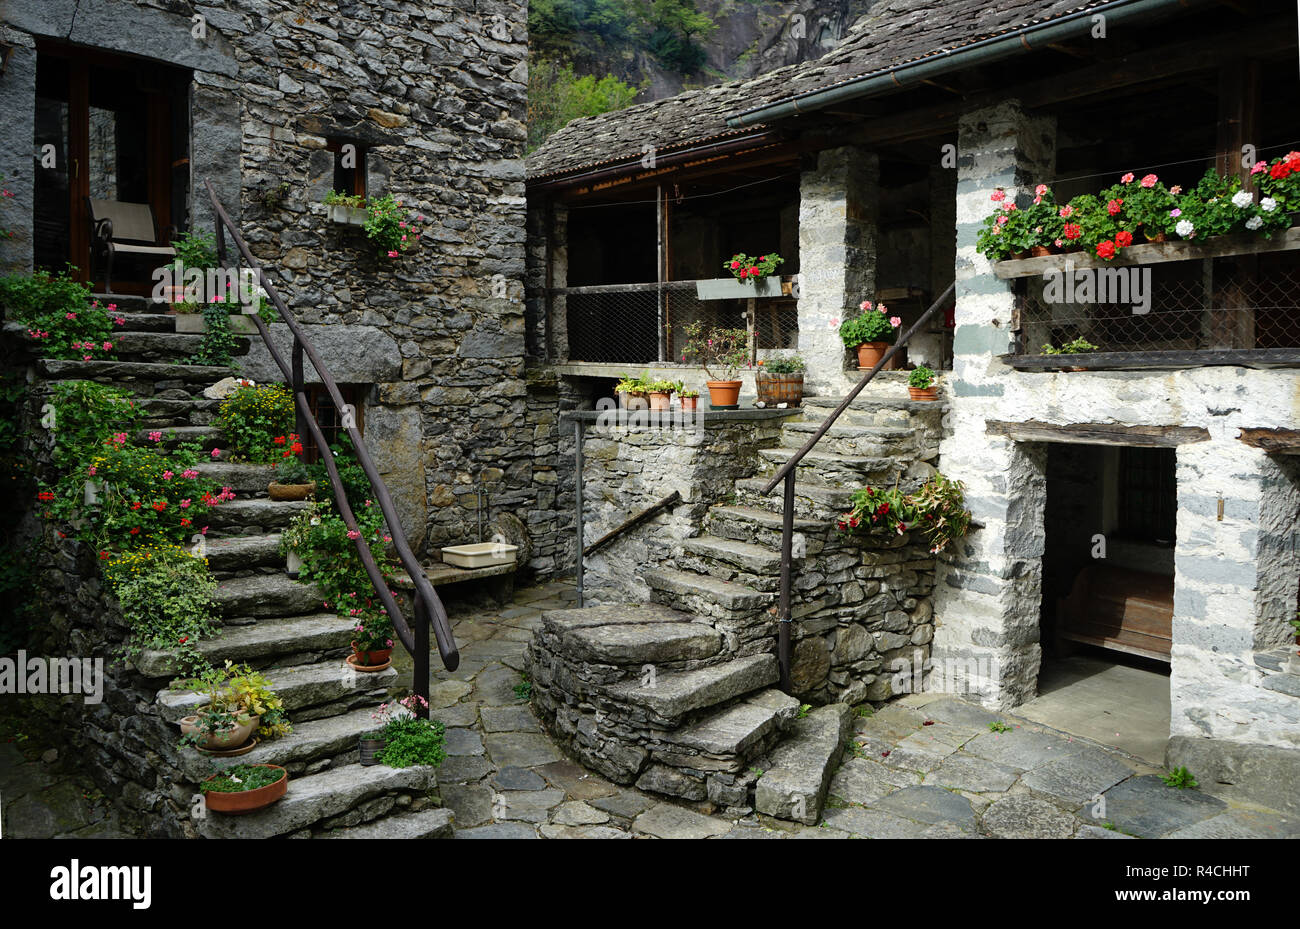 Rock Stairs and traditional stone houses at townsquare in old village Sonlerto, Val Bavona, Tcicino, Switzerland Stock Photo